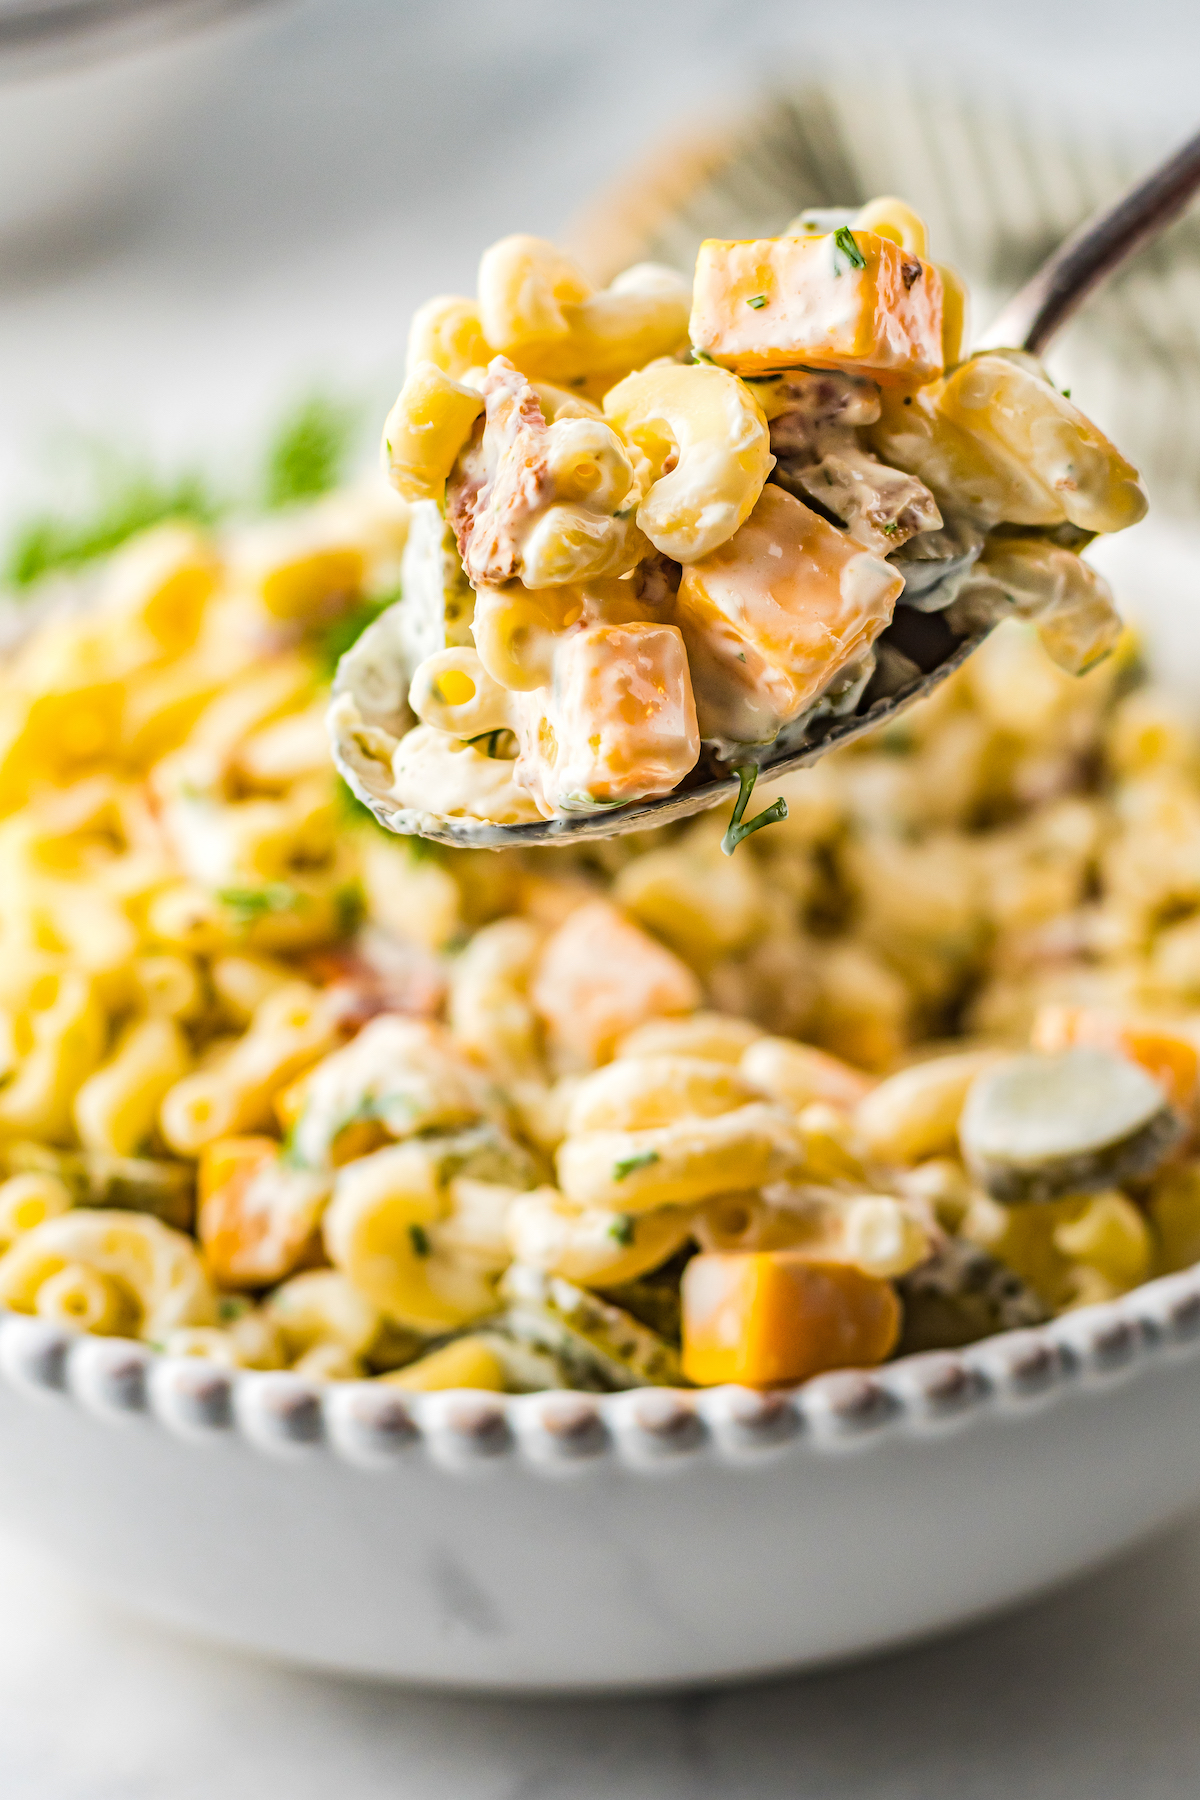 A bowl of creamy pasta with a spoonful being lifted toward the camera. The sala